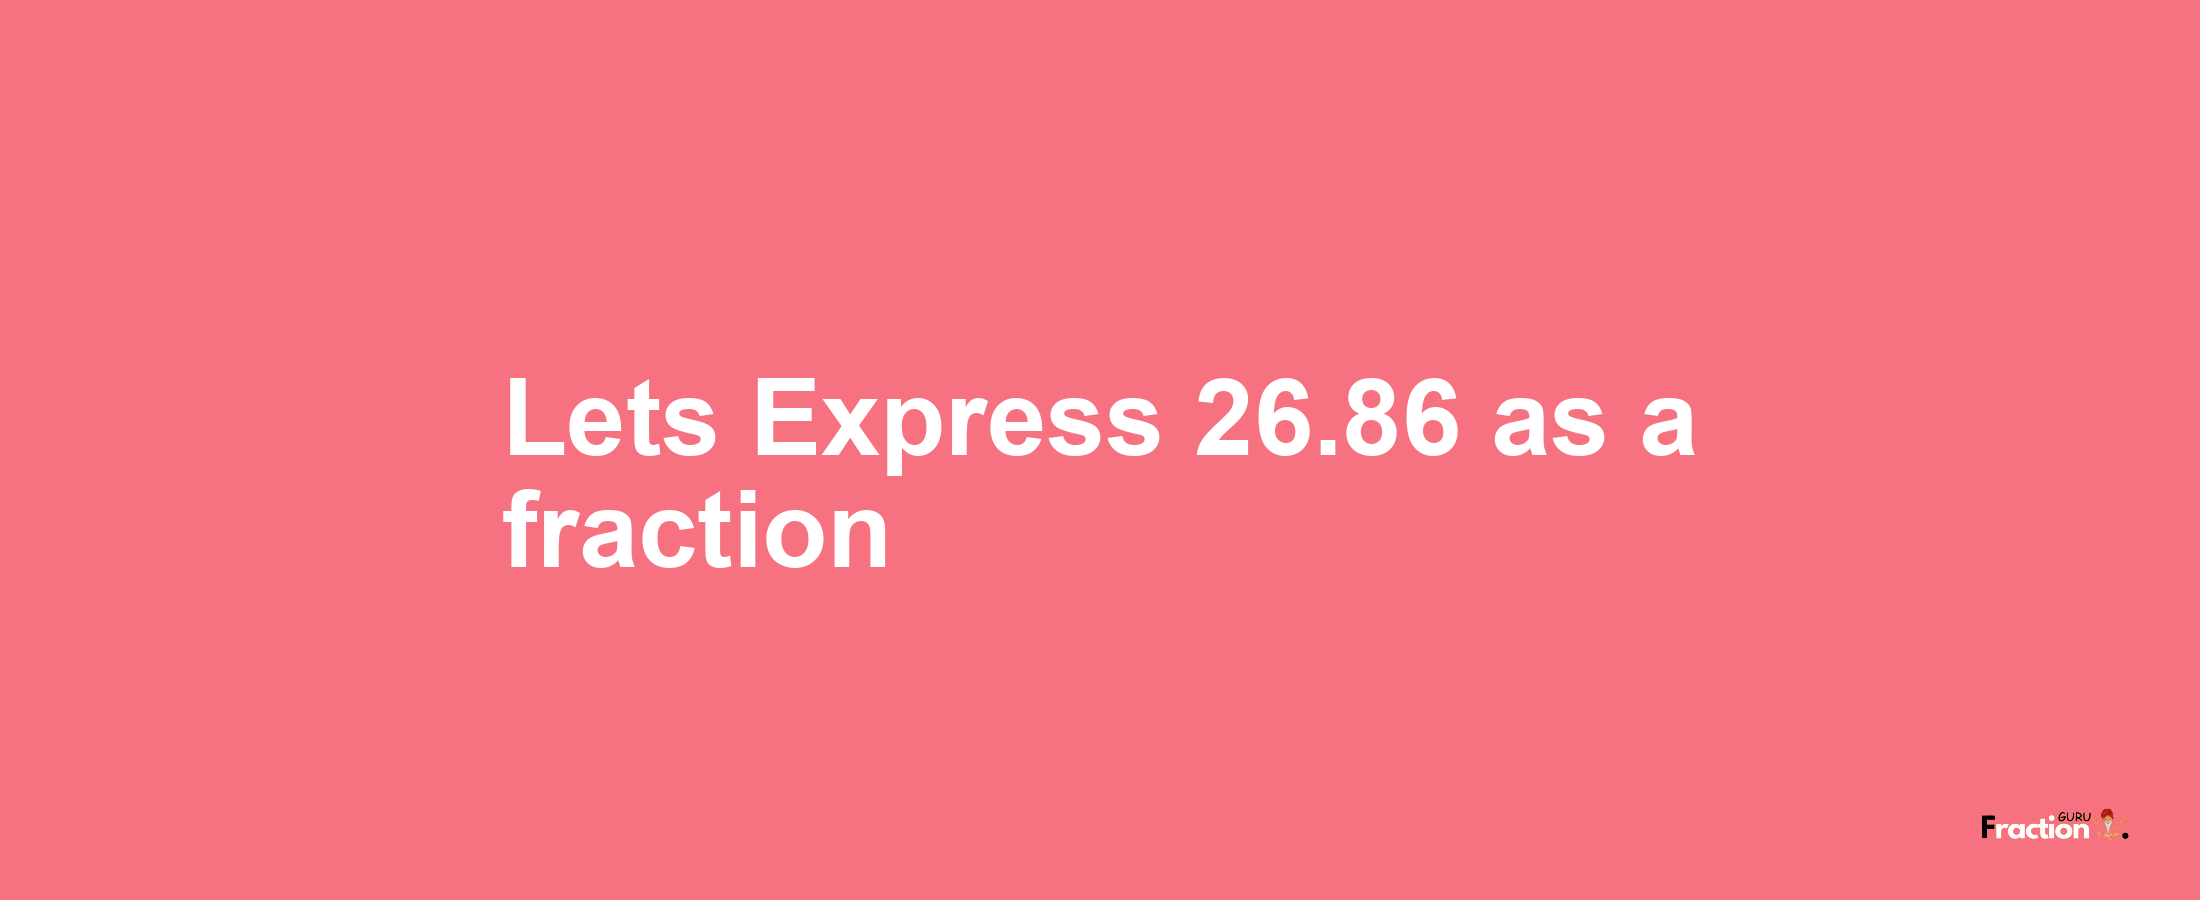 Lets Express 26.86 as afraction